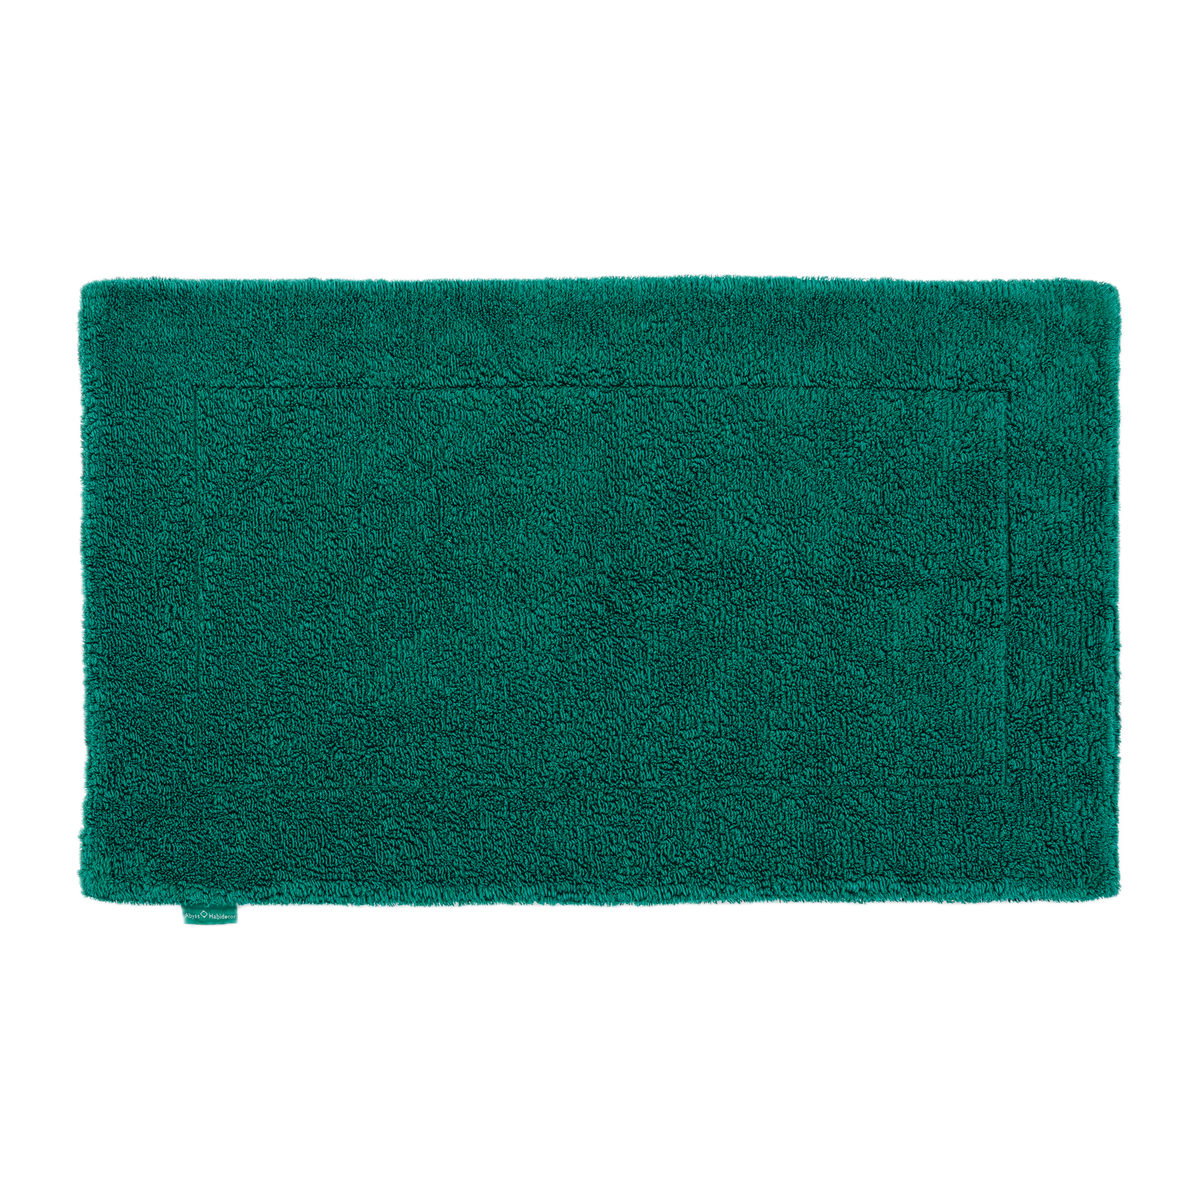 Abyss Super Pile Bath Mat in British Green Color